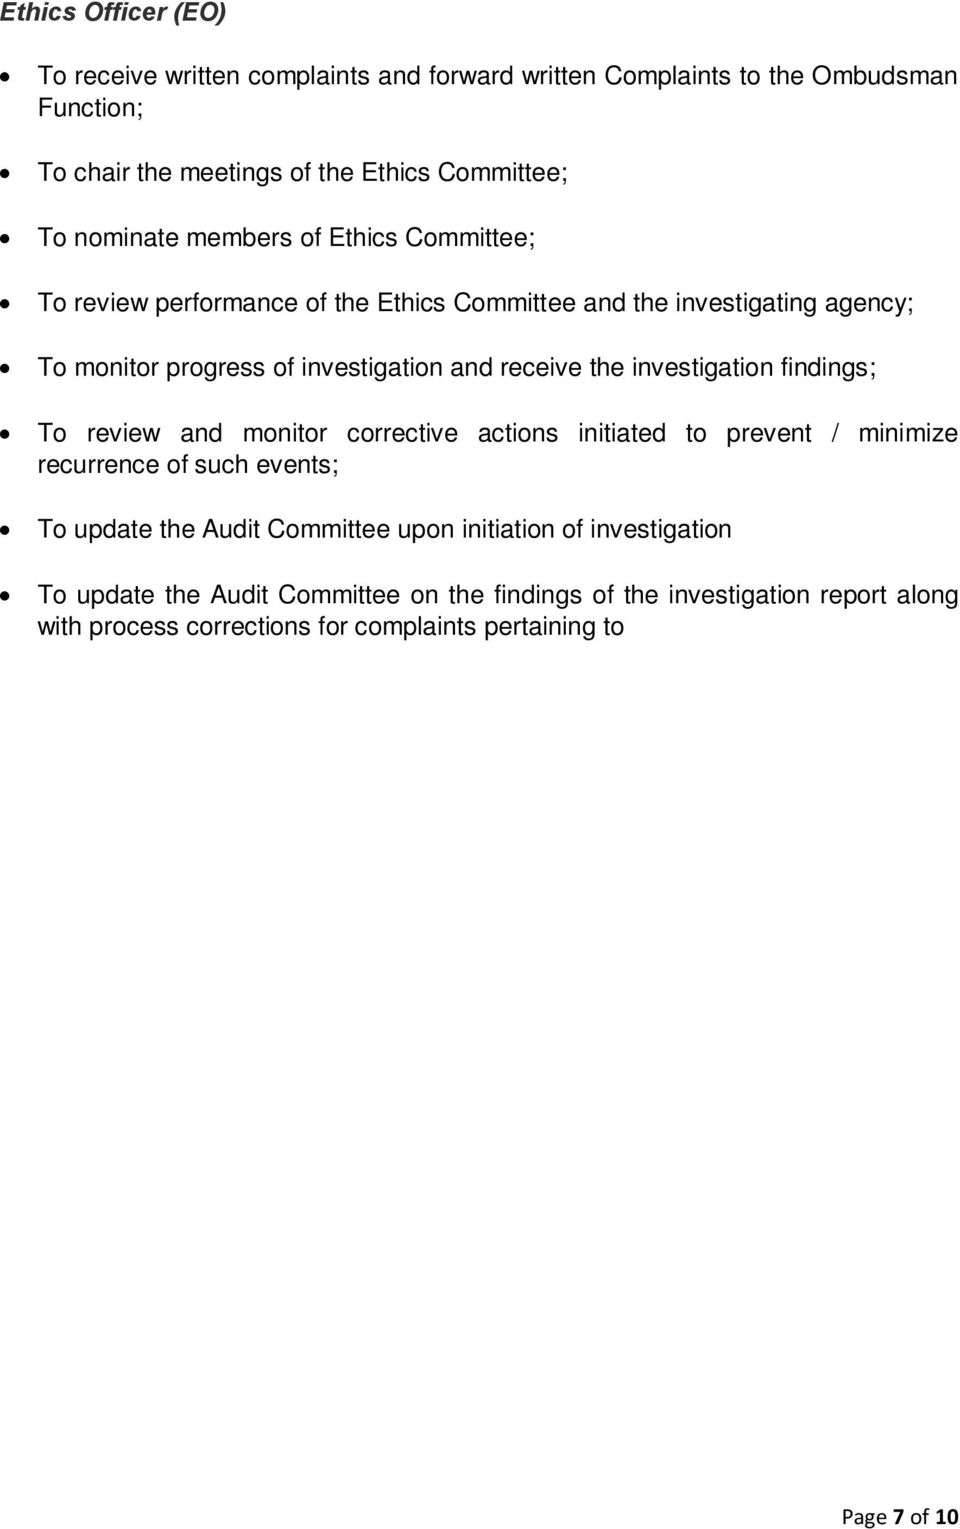 initiated to prevent / minimize recurrence of such events; To update the Audit Committee upon initiation of investigation To update the Audit Committee on the findings of the investigation report